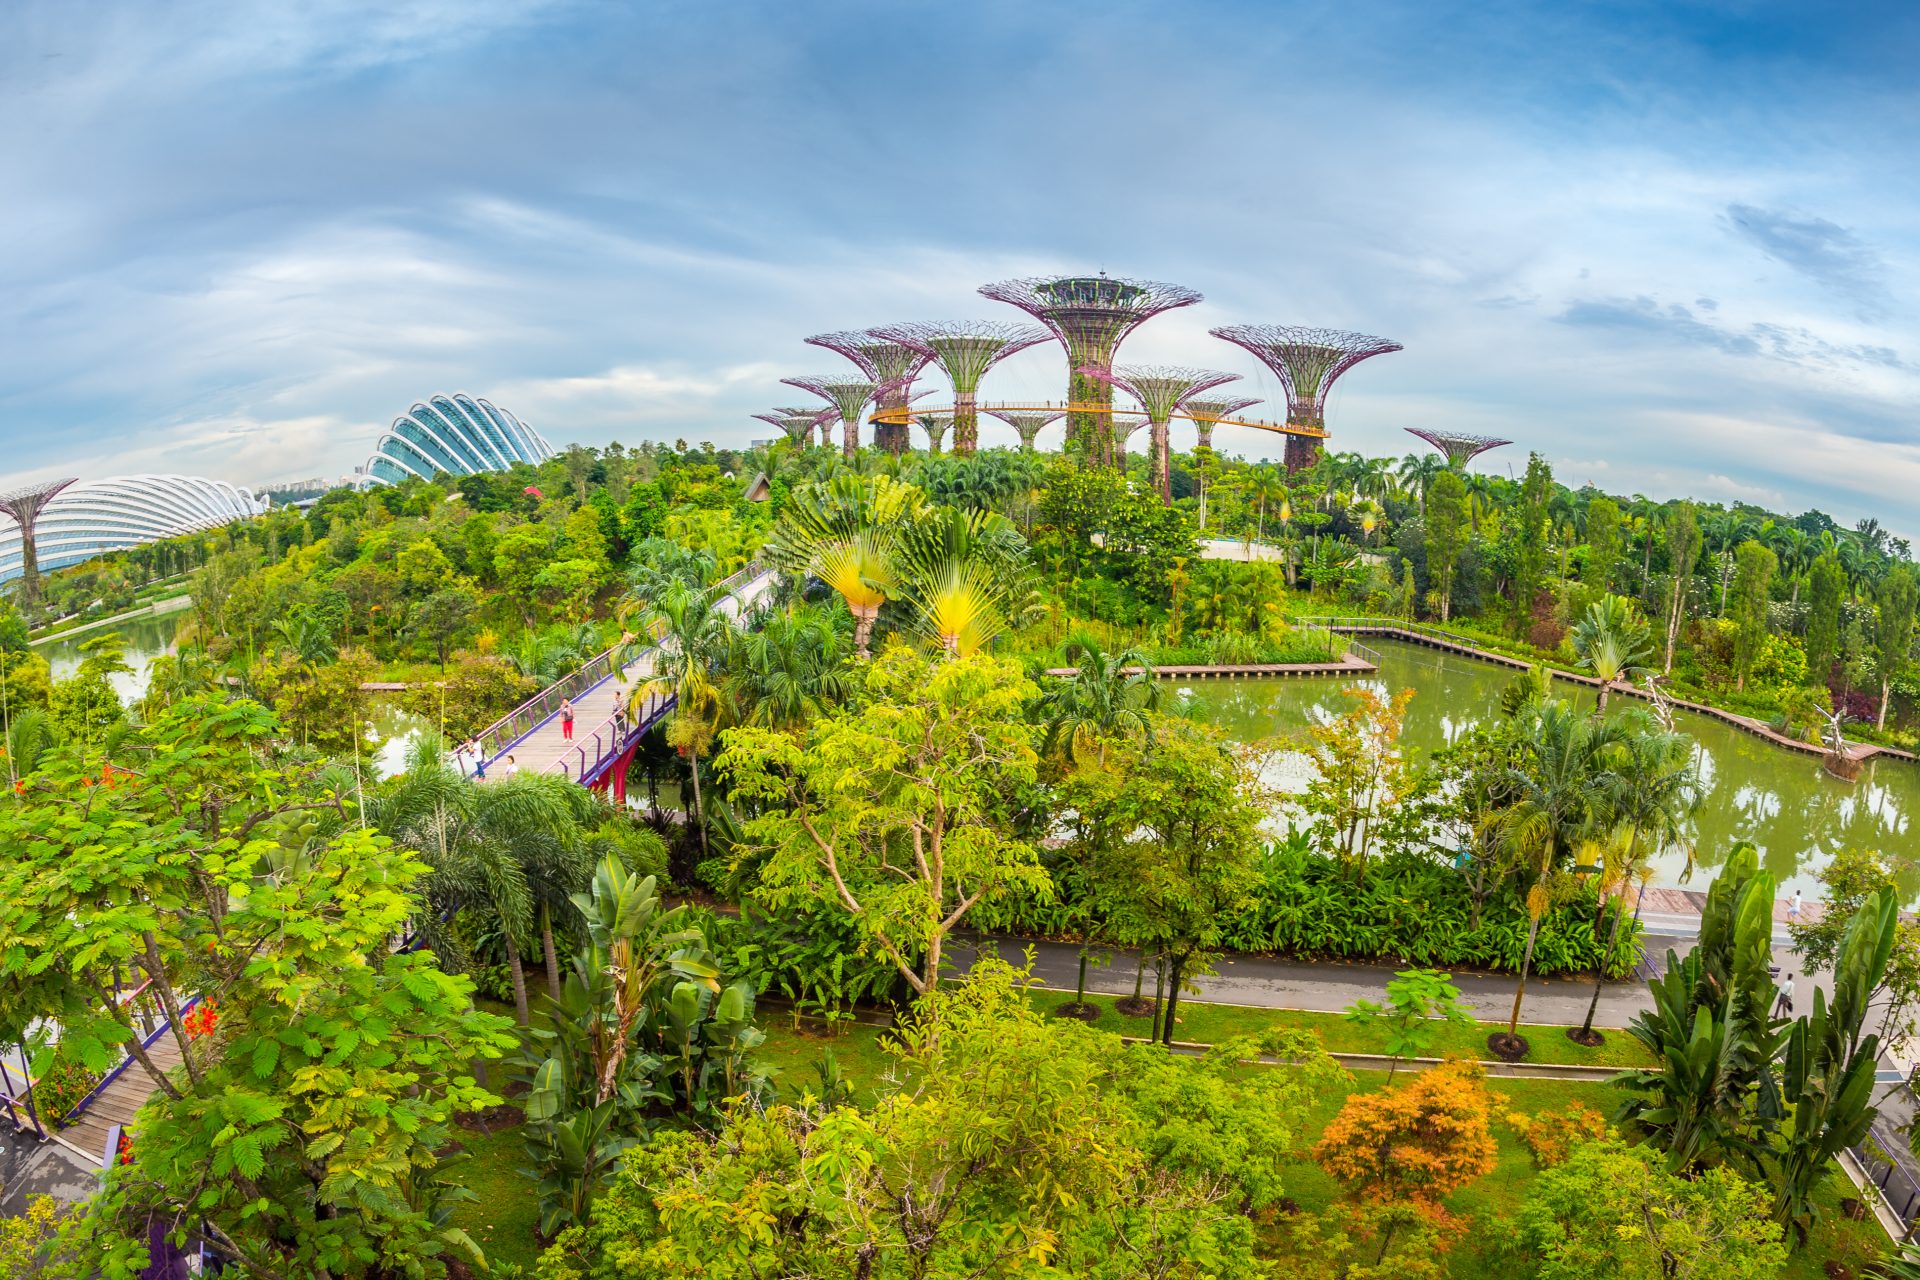 <p>The entire city-state of Singapore is possibly the world's first “biophilic city.” The local government has made an effort to incorporate plants, water, and wildlife into buildings, parks, cityscapes, and government offices.</p>